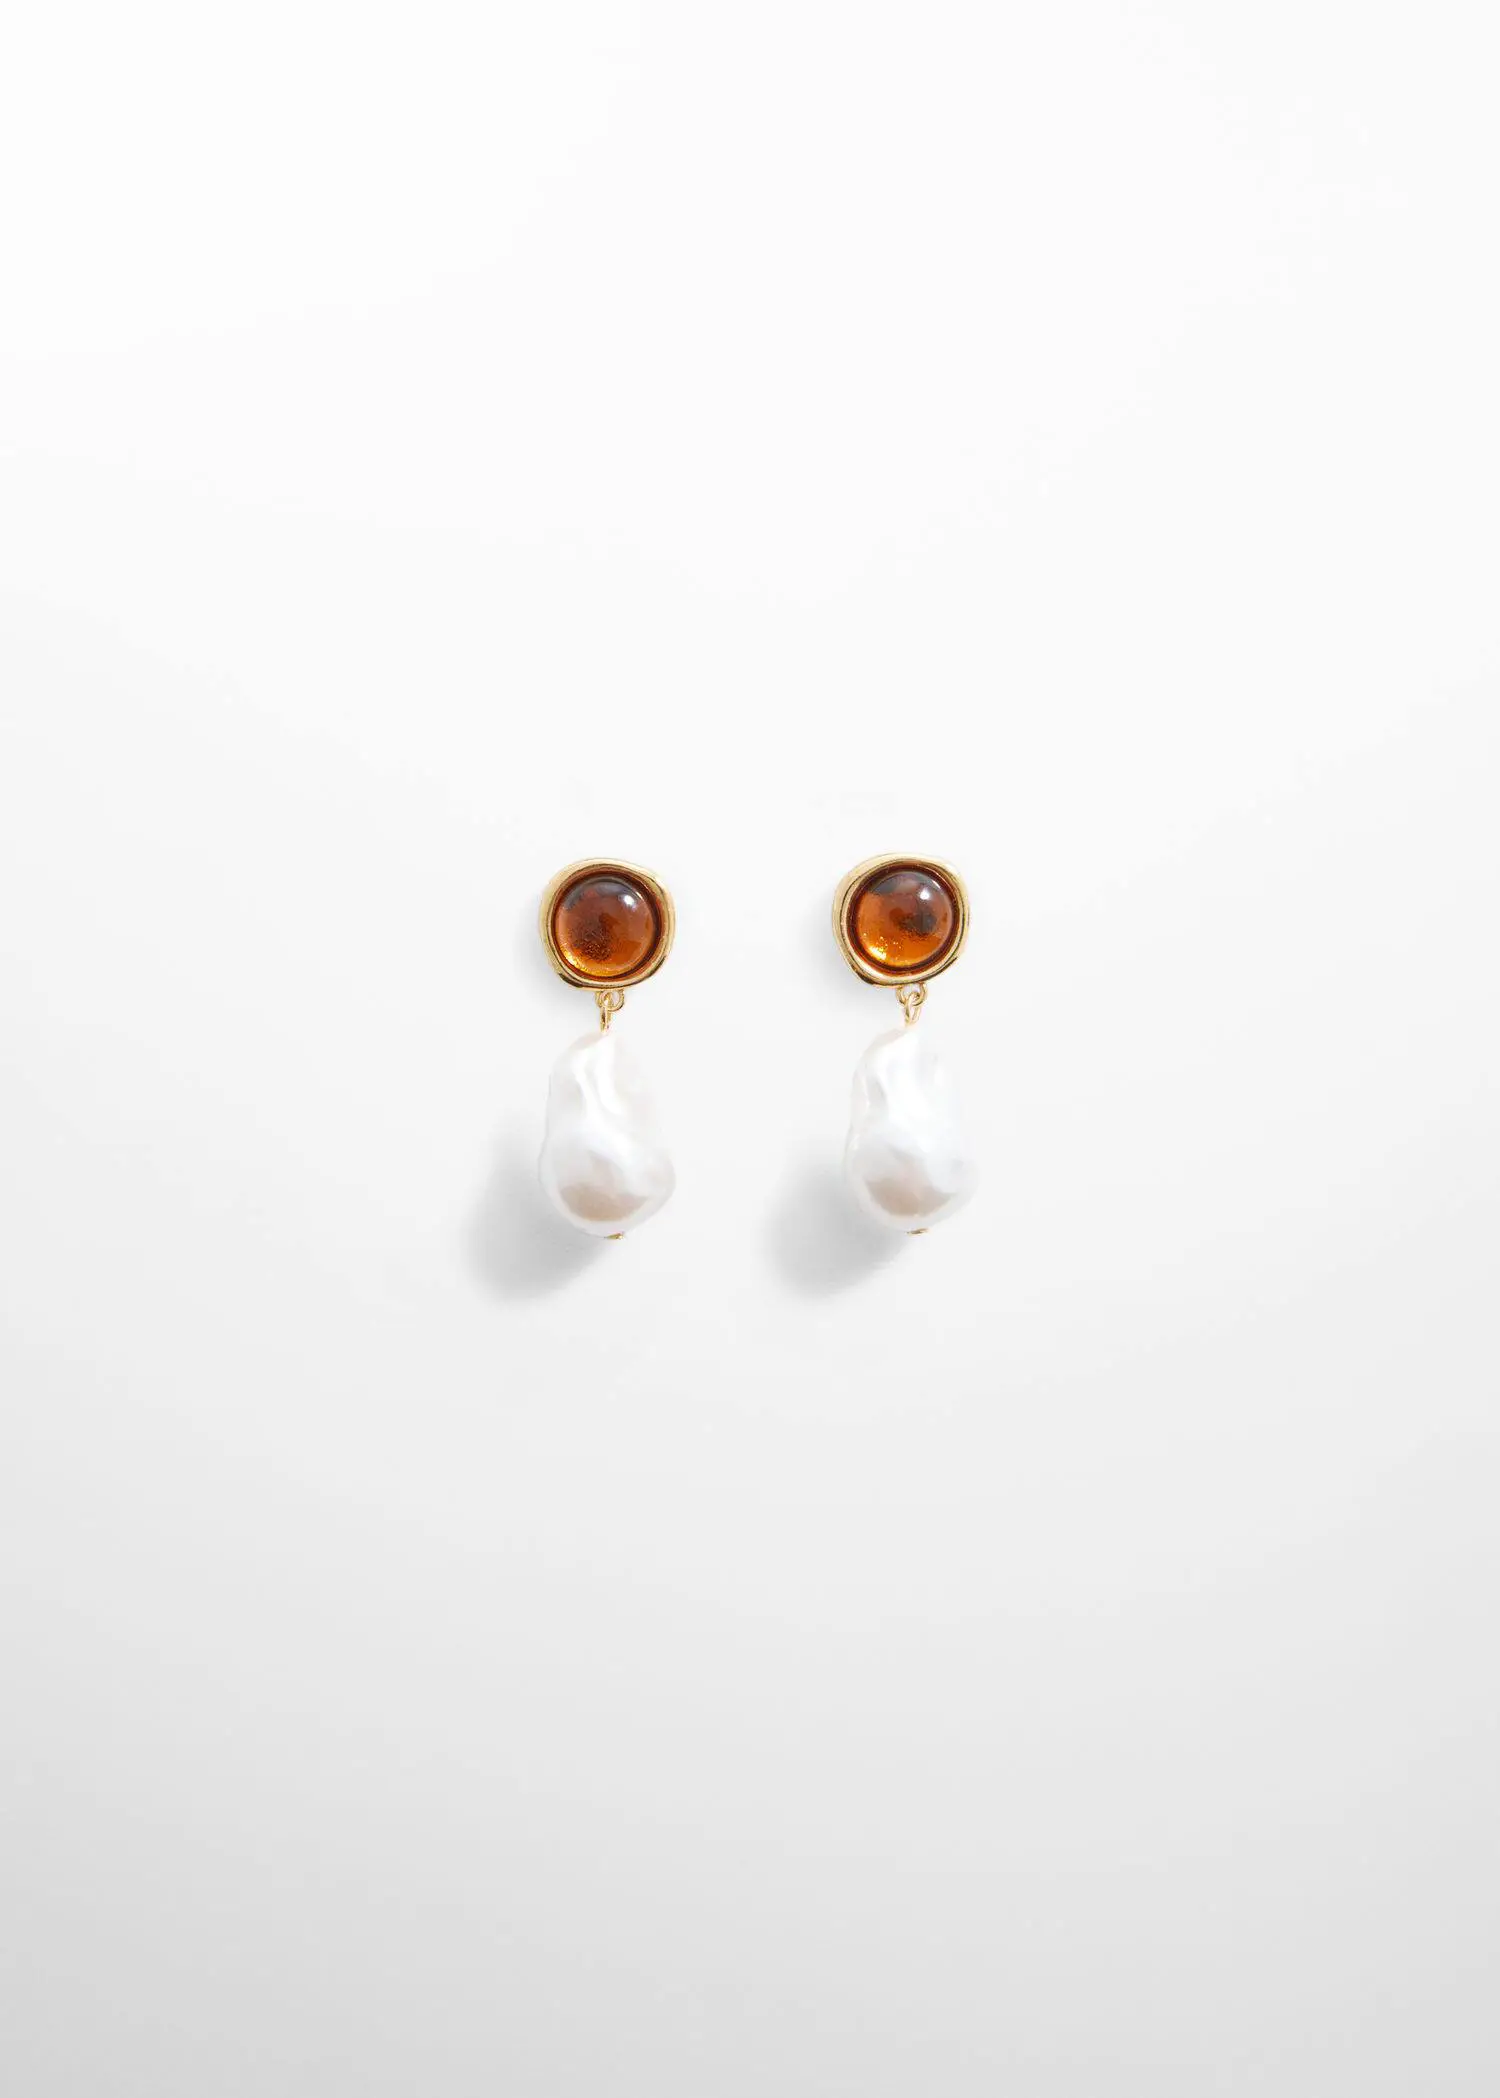 Mango Combined stone earrings. a pair of gold earrings with pearls hanging off of them. 